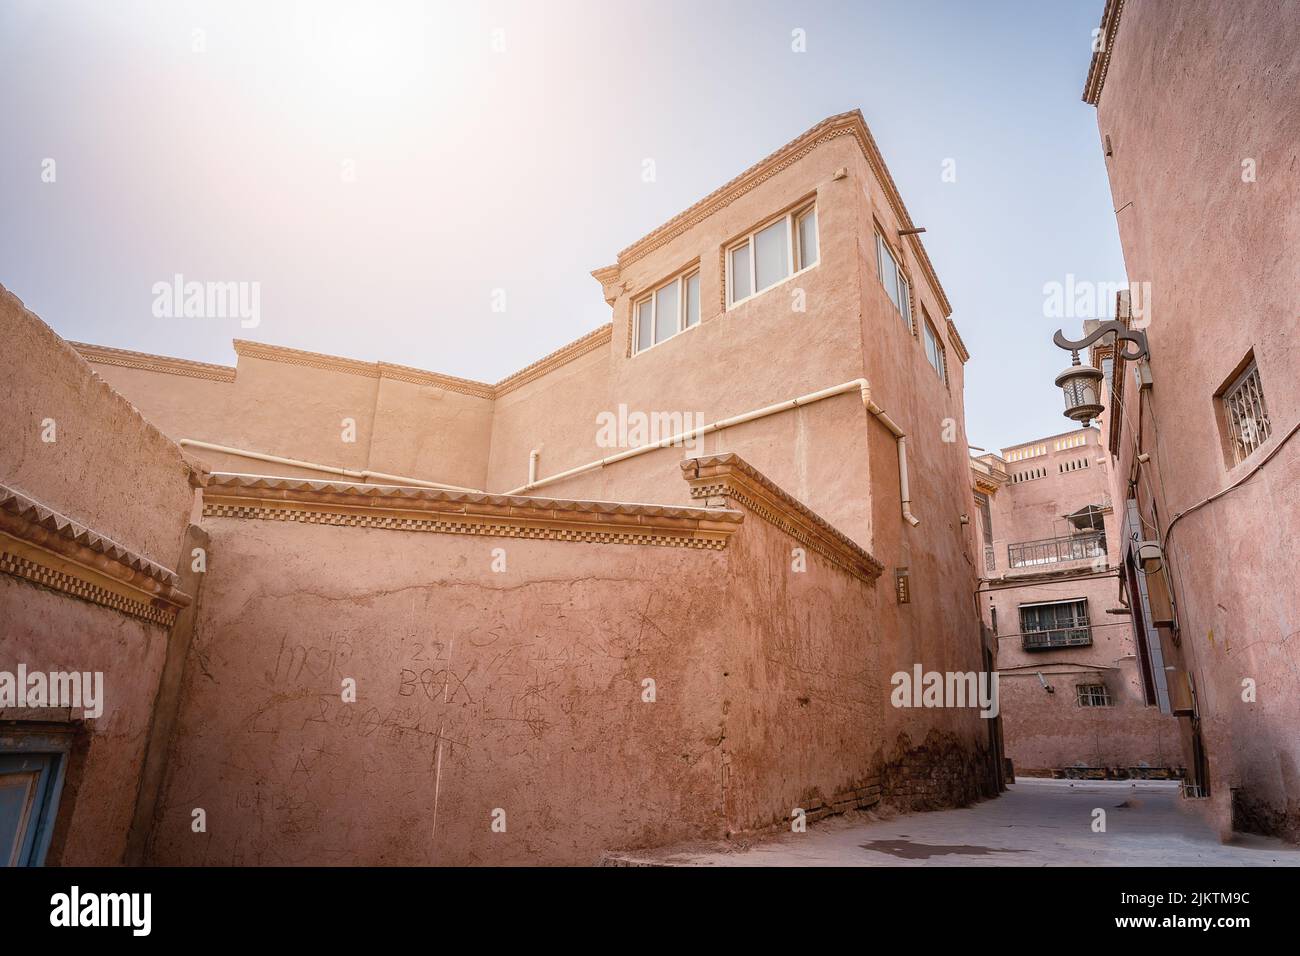 The narrow street with brown stone buildings. Central Asia. Stock Photo